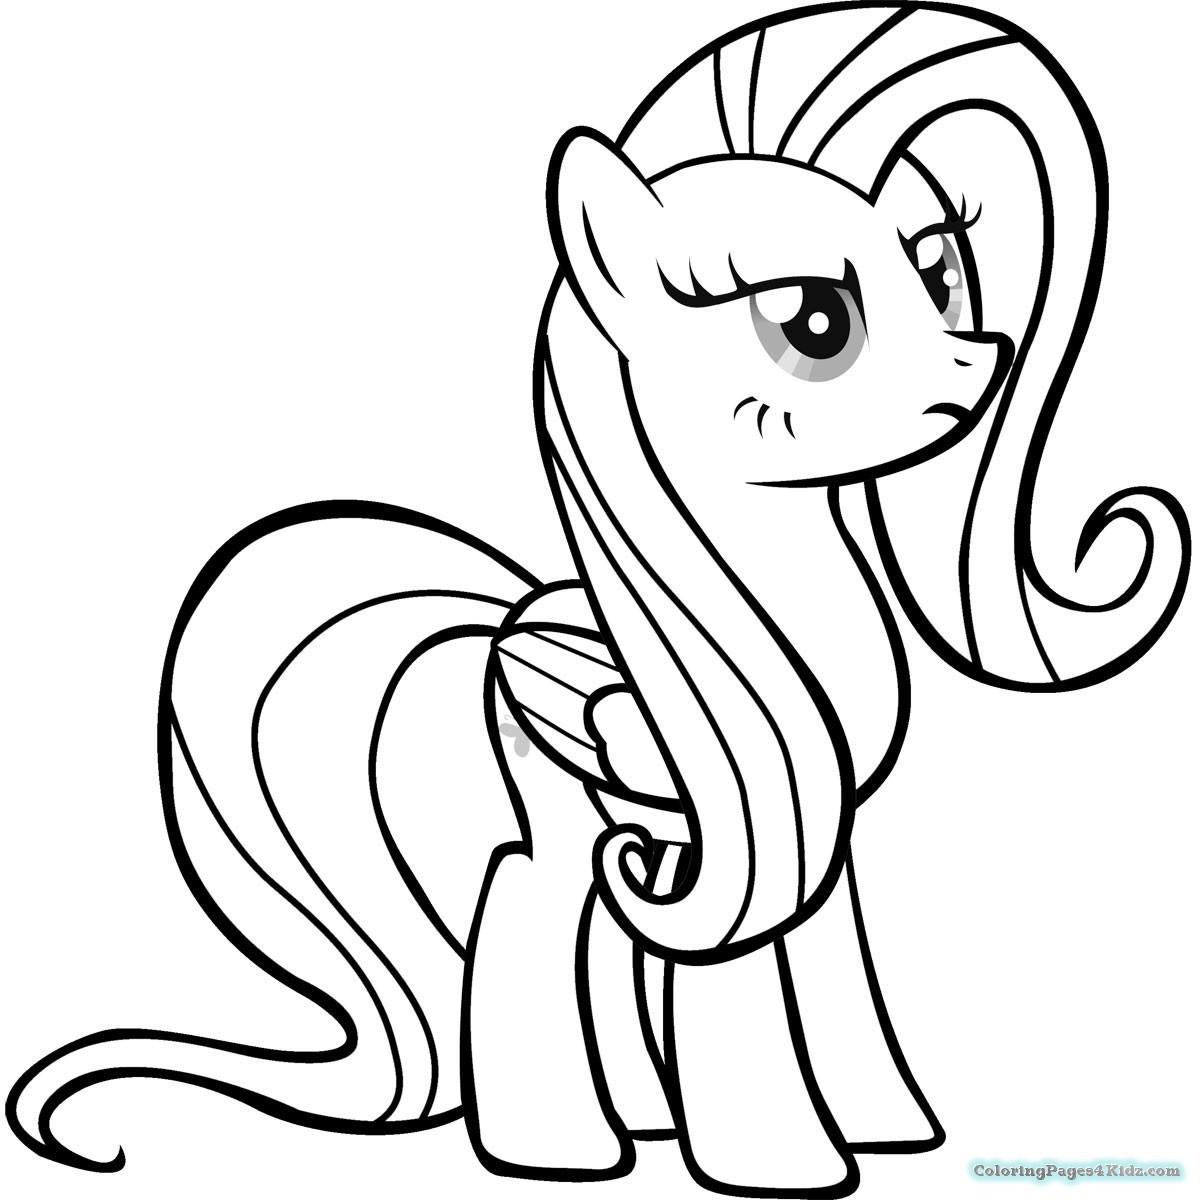 Baby Pony Coloring Pages
 My Little Pony Coloring Pages Fluttershy Baby